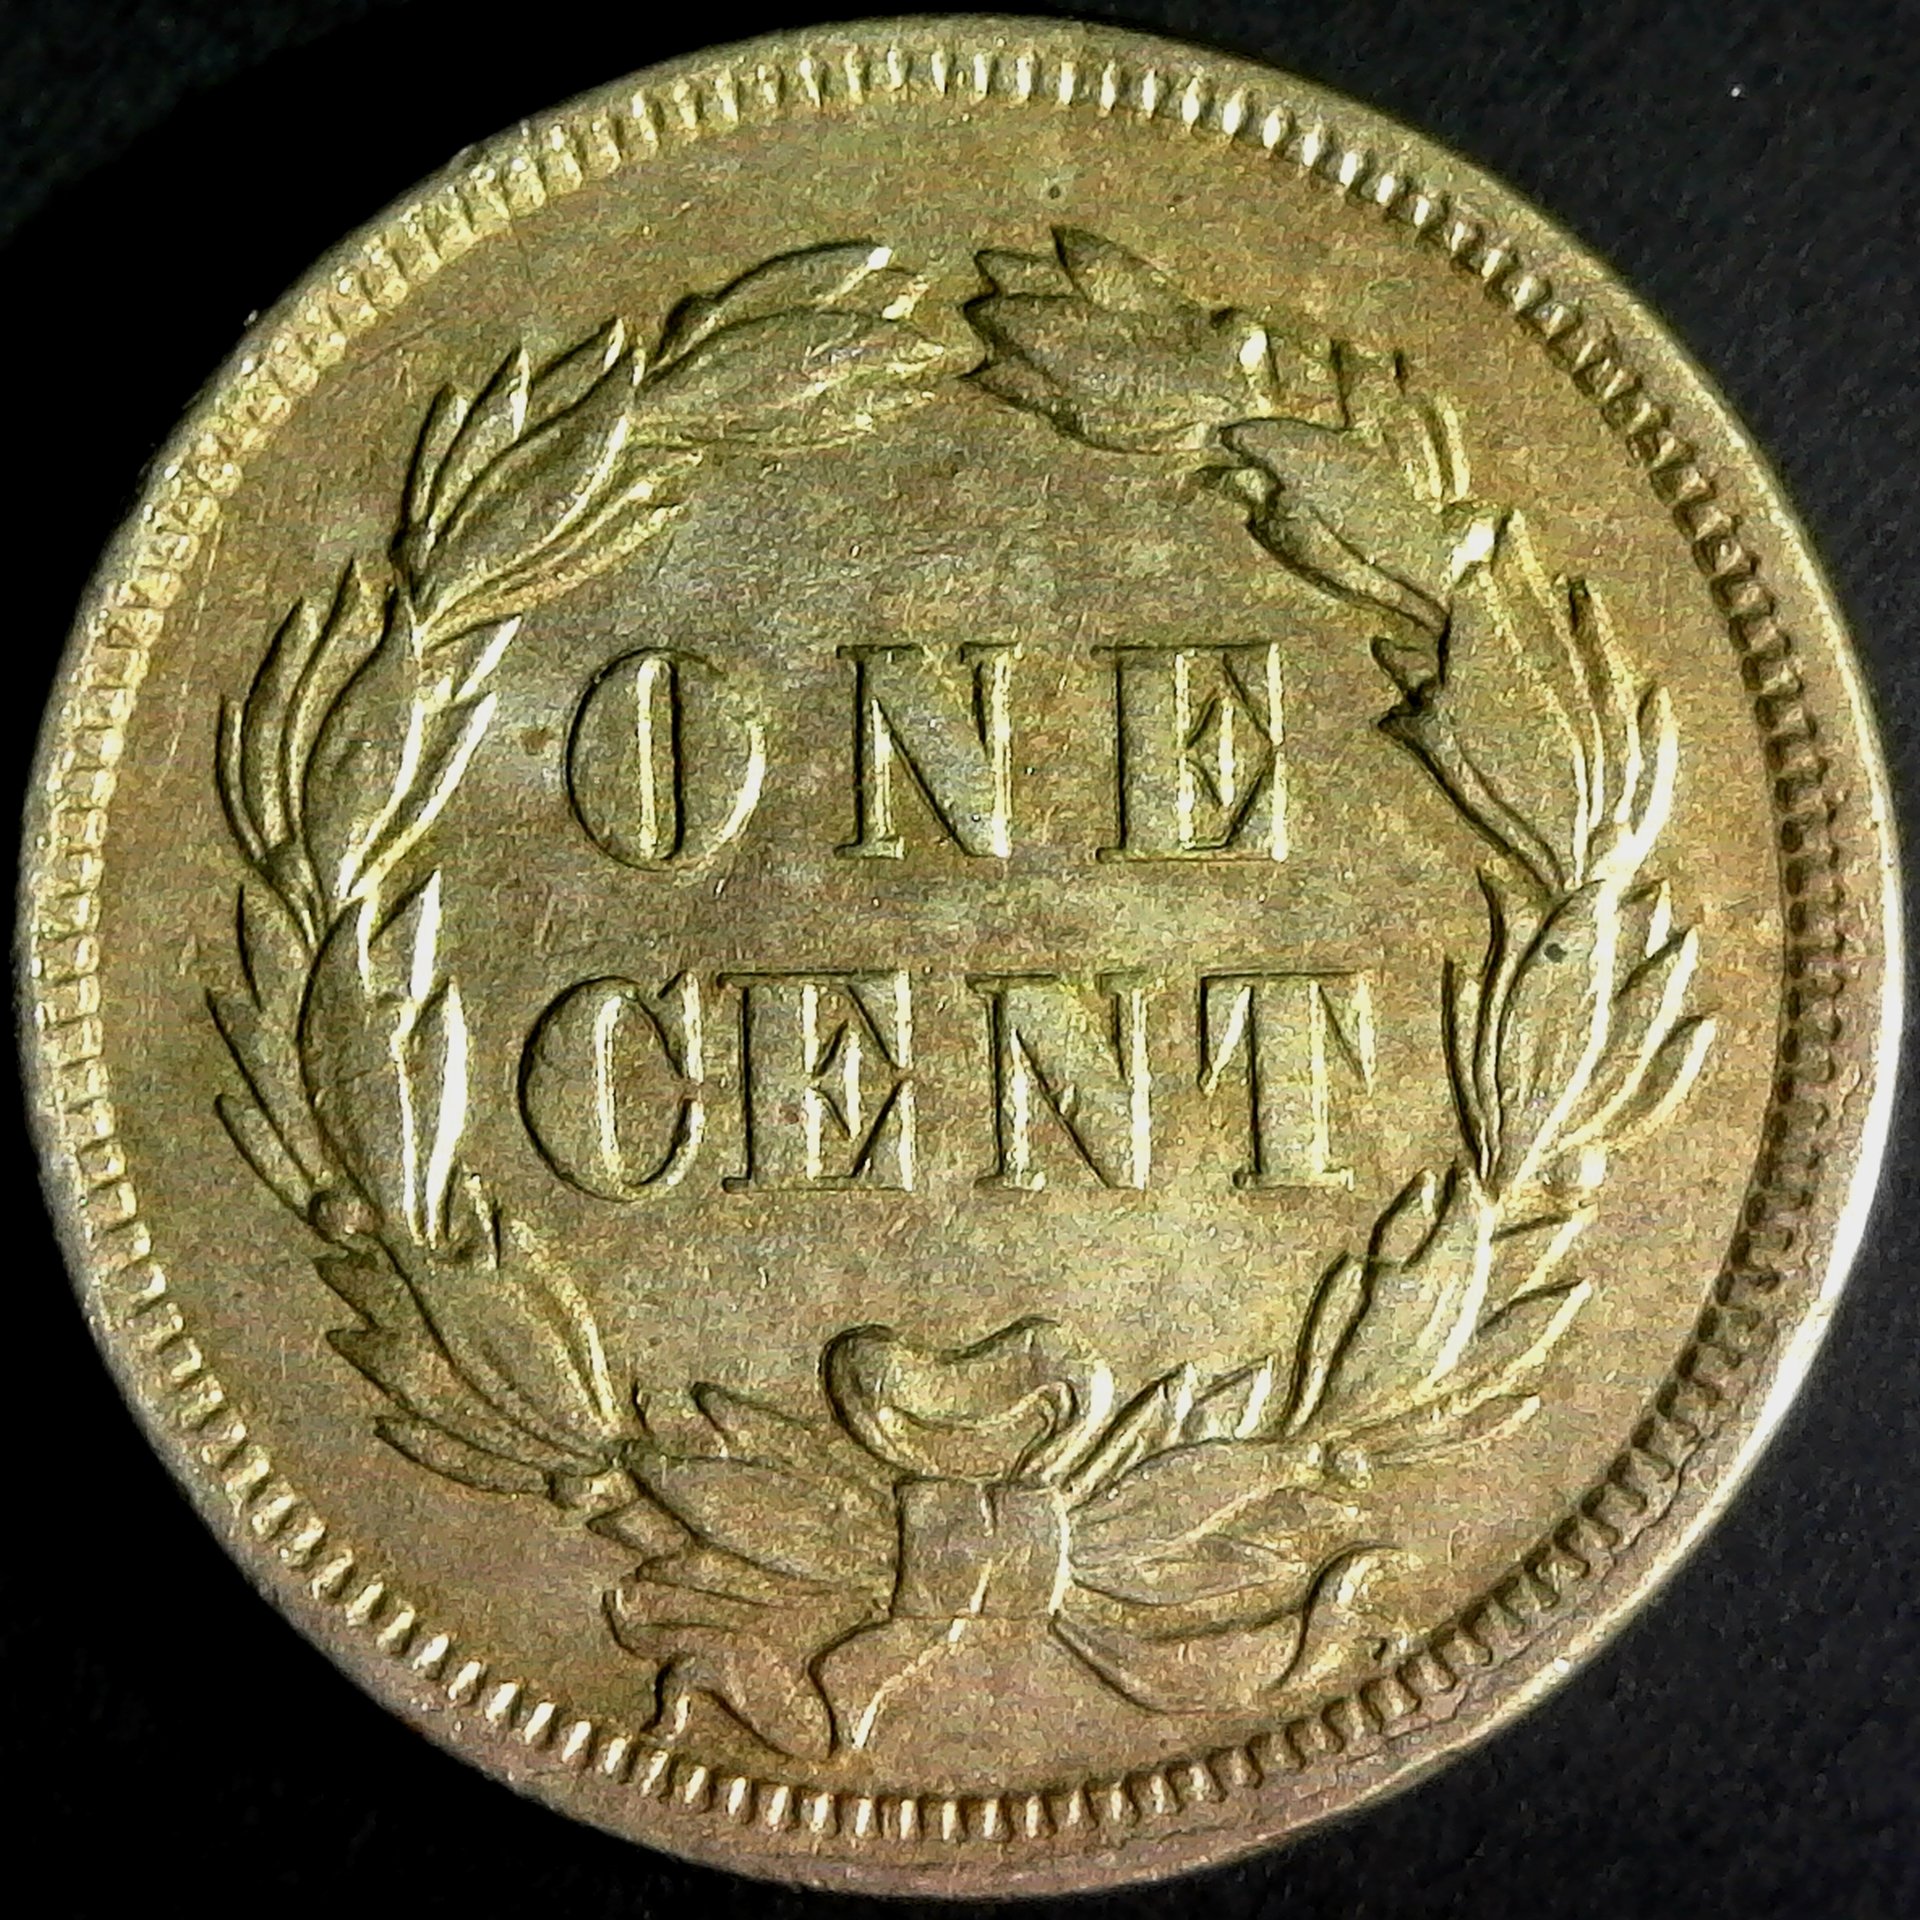 United States One Cent 1859 A rev.jpg